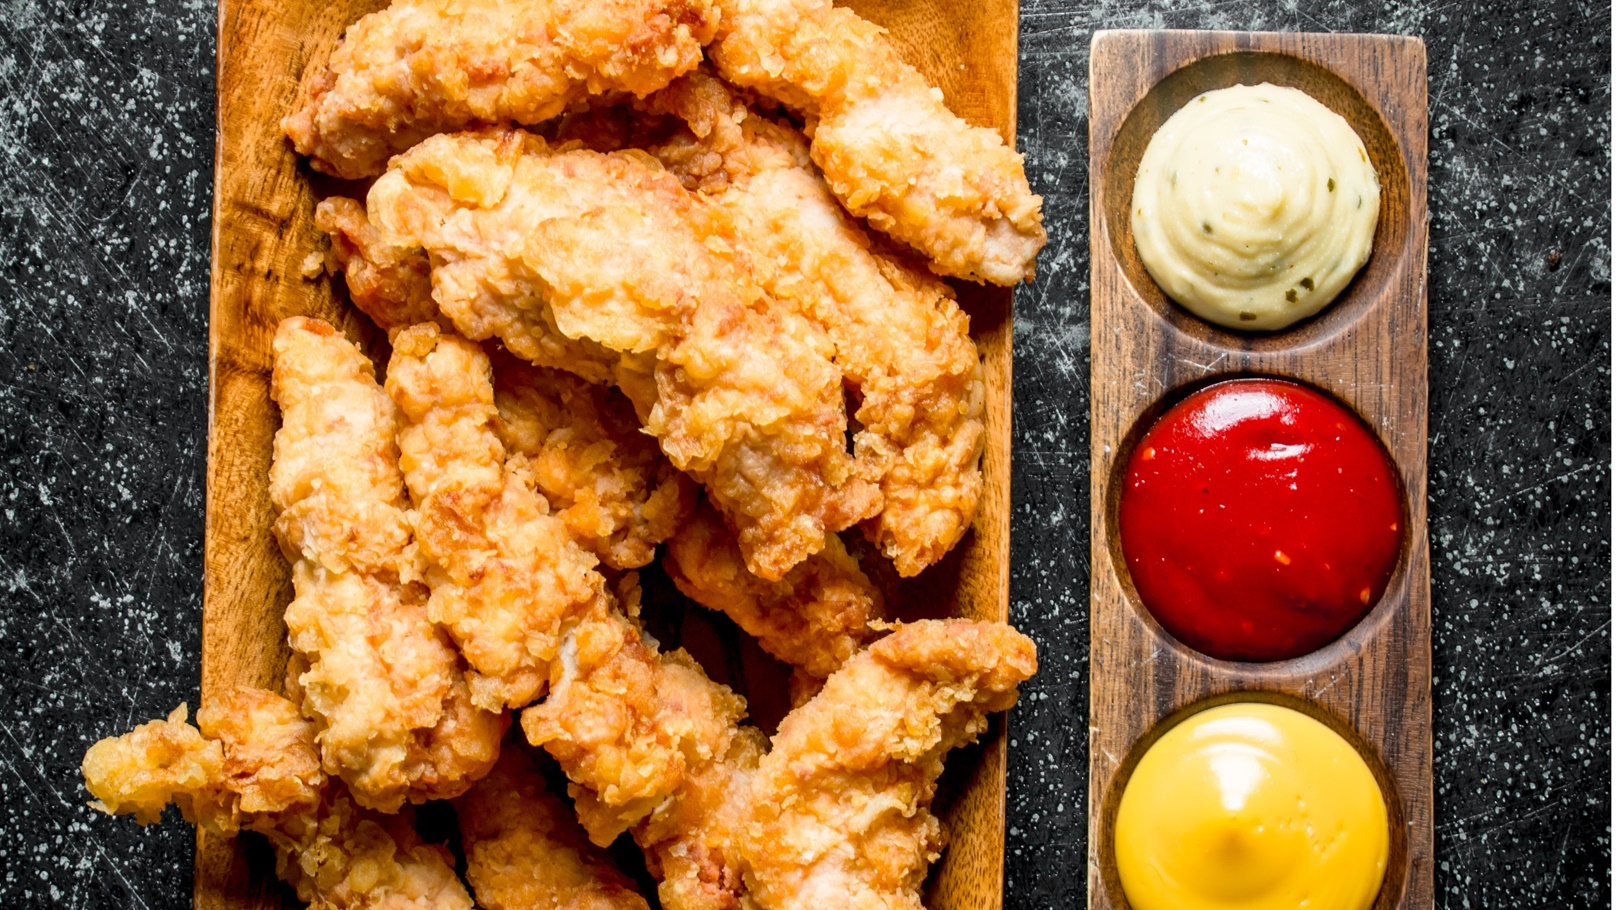 chicken-strips-with-different-sauces-2021-08-30-04-18-45-utc